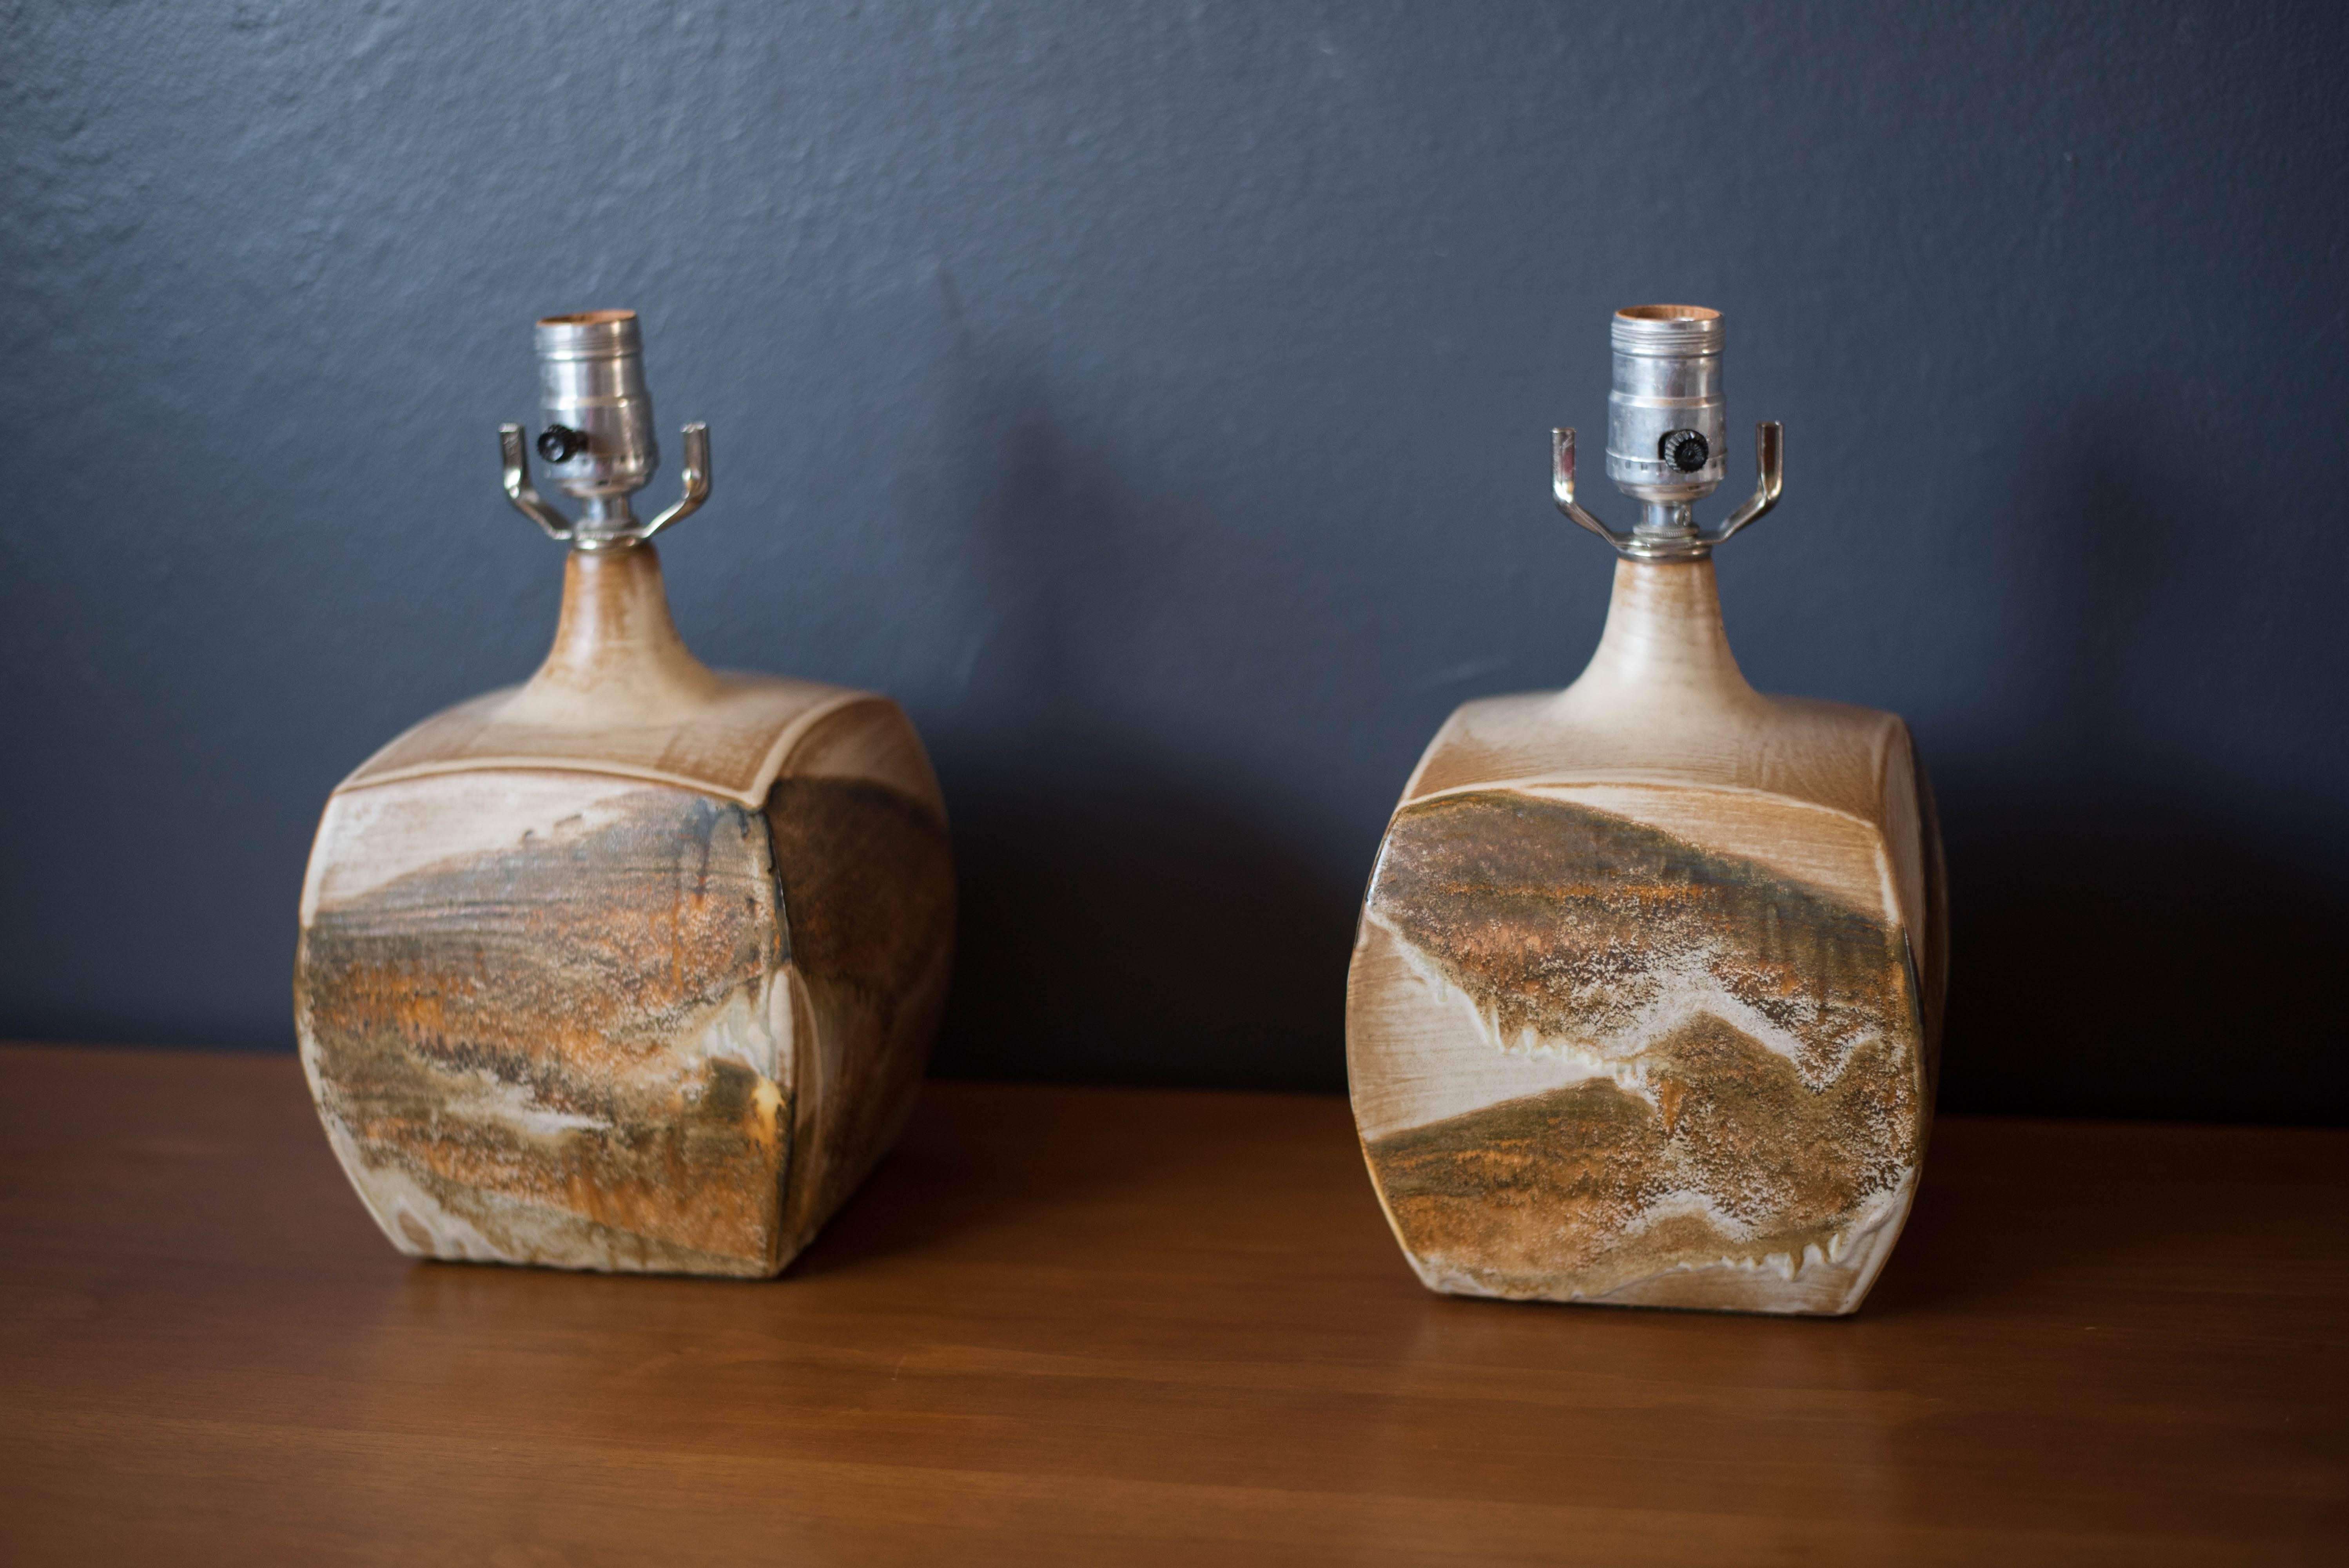 Mid-Century Modern studio ceramic pottery lamps, circa 1970s. This pair displays a desert sand palette with bisque, ivory, and beige tones in a drip glaze matte finish. Price is for the set of two.